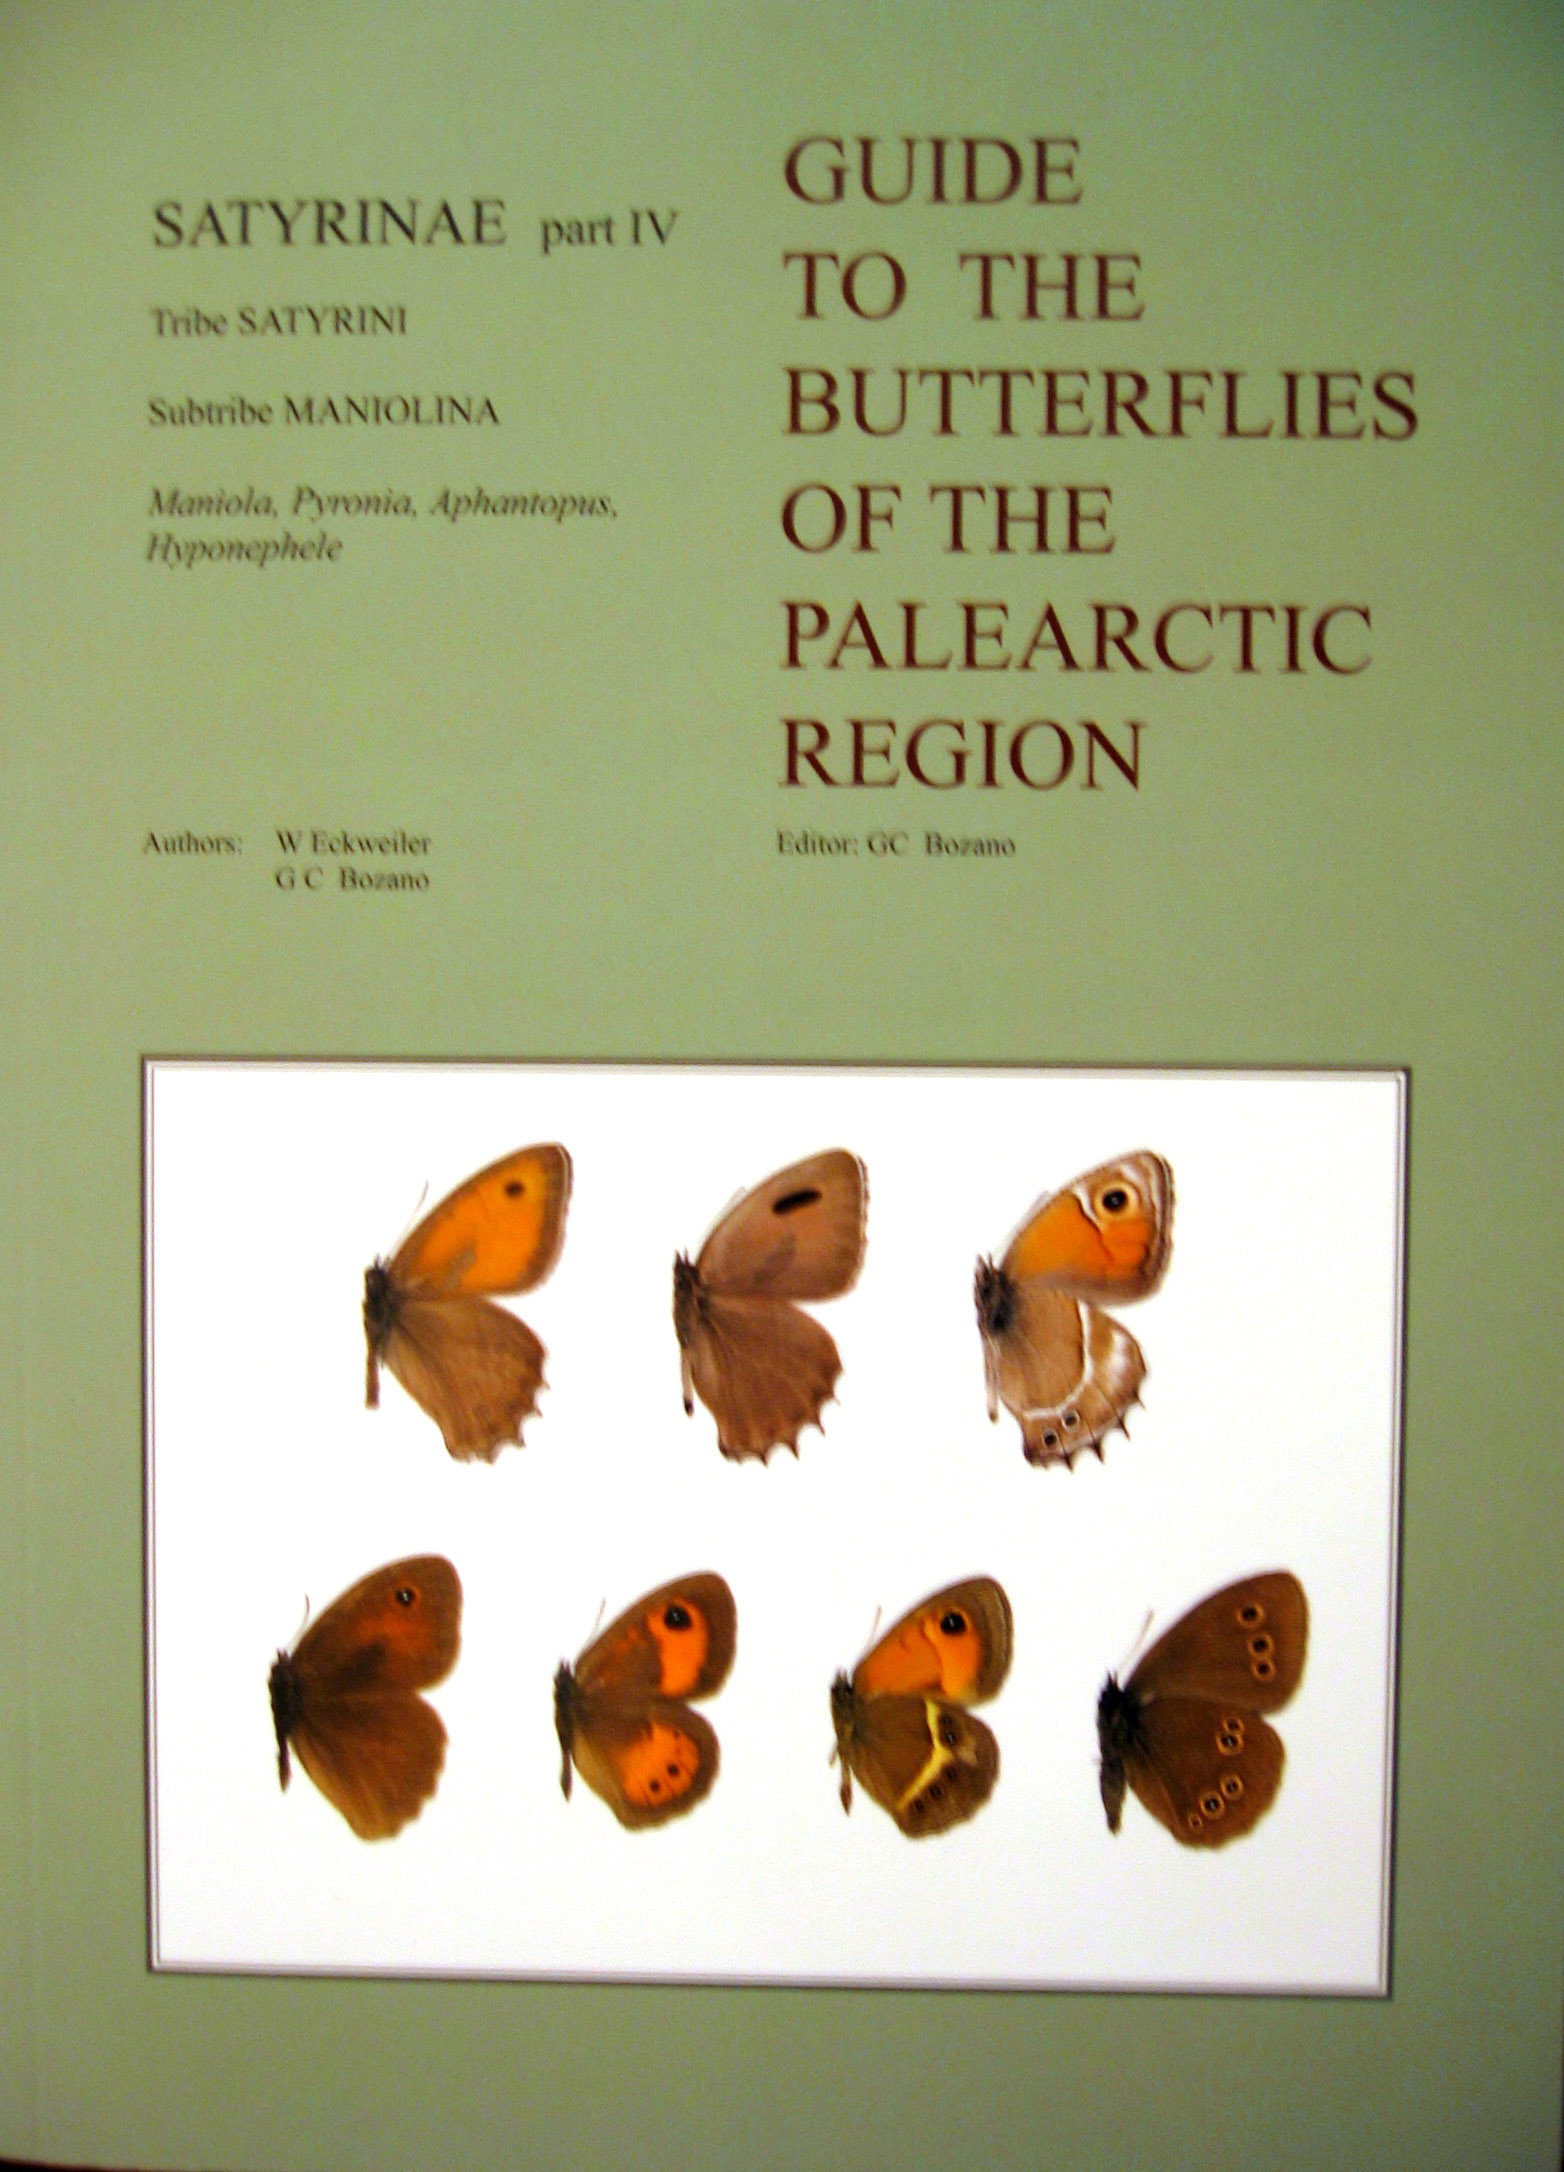 GUIDE TO THE BUTTERFLIES OF THE PALEARCTIC REGION